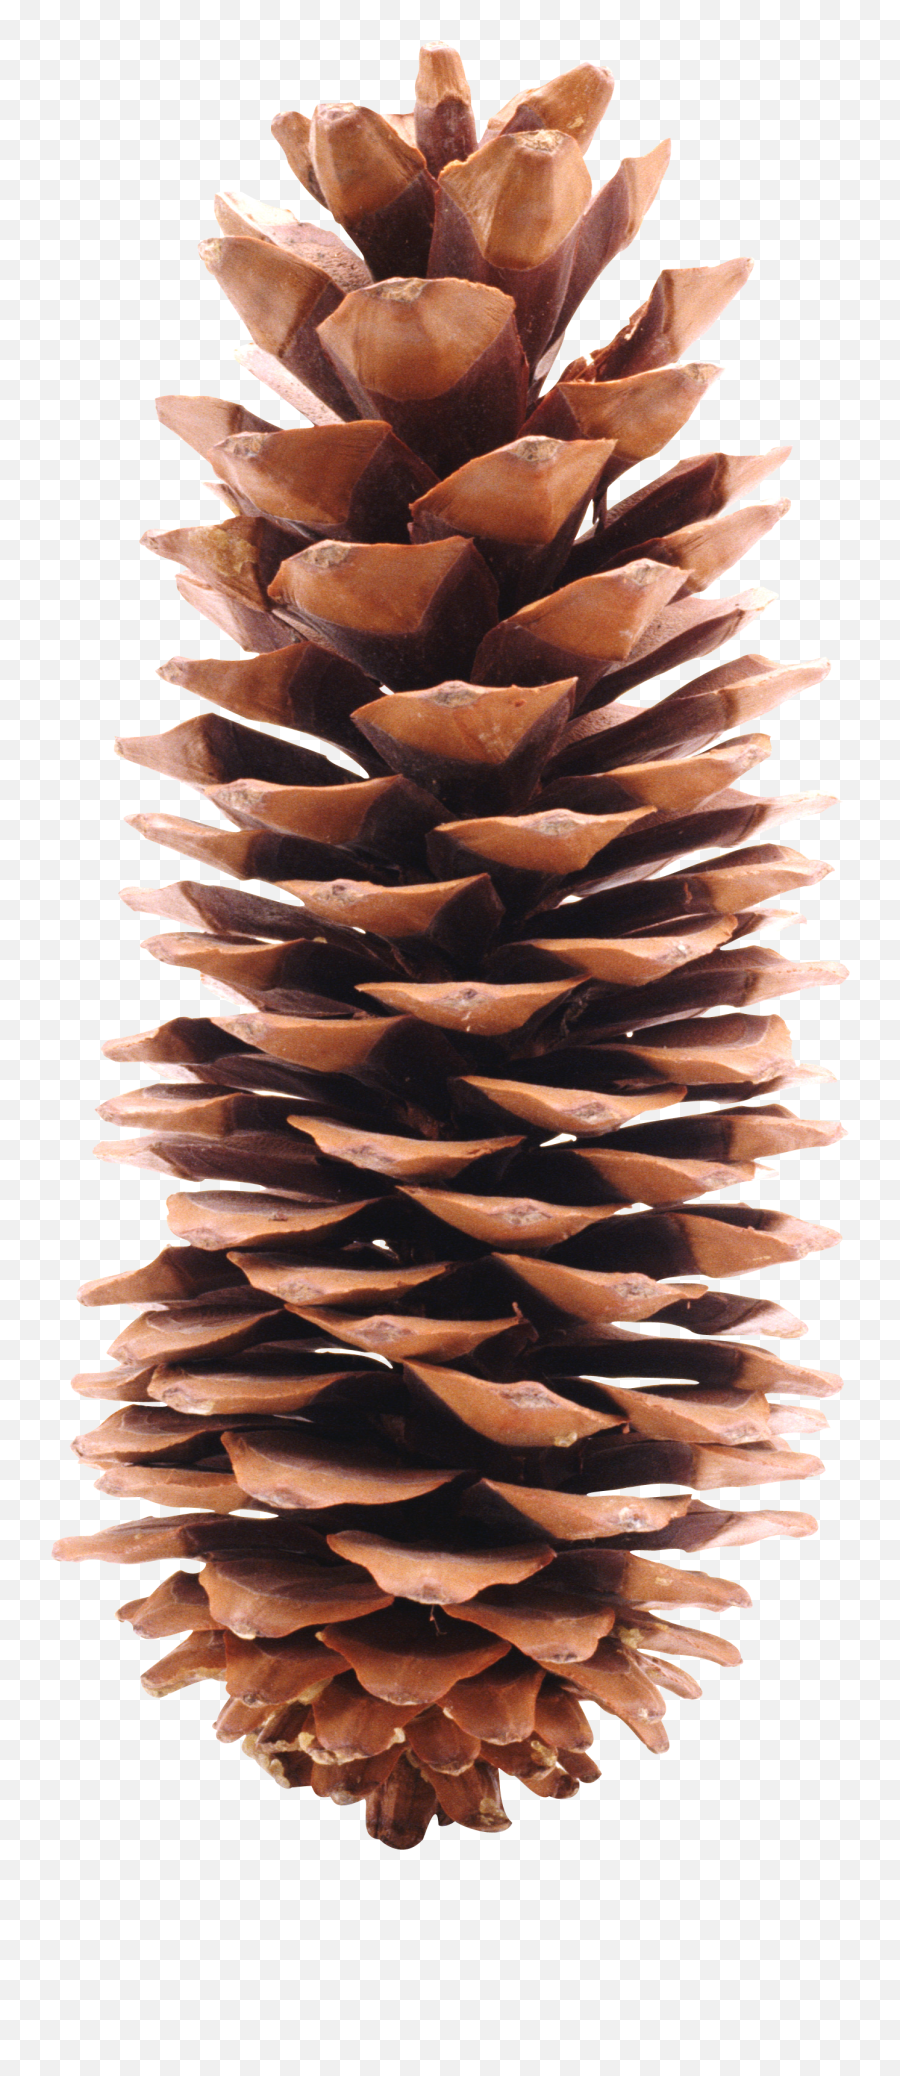 Pine Cone Png Image For Free Download - Pine Cone Png,Pine Cone Png